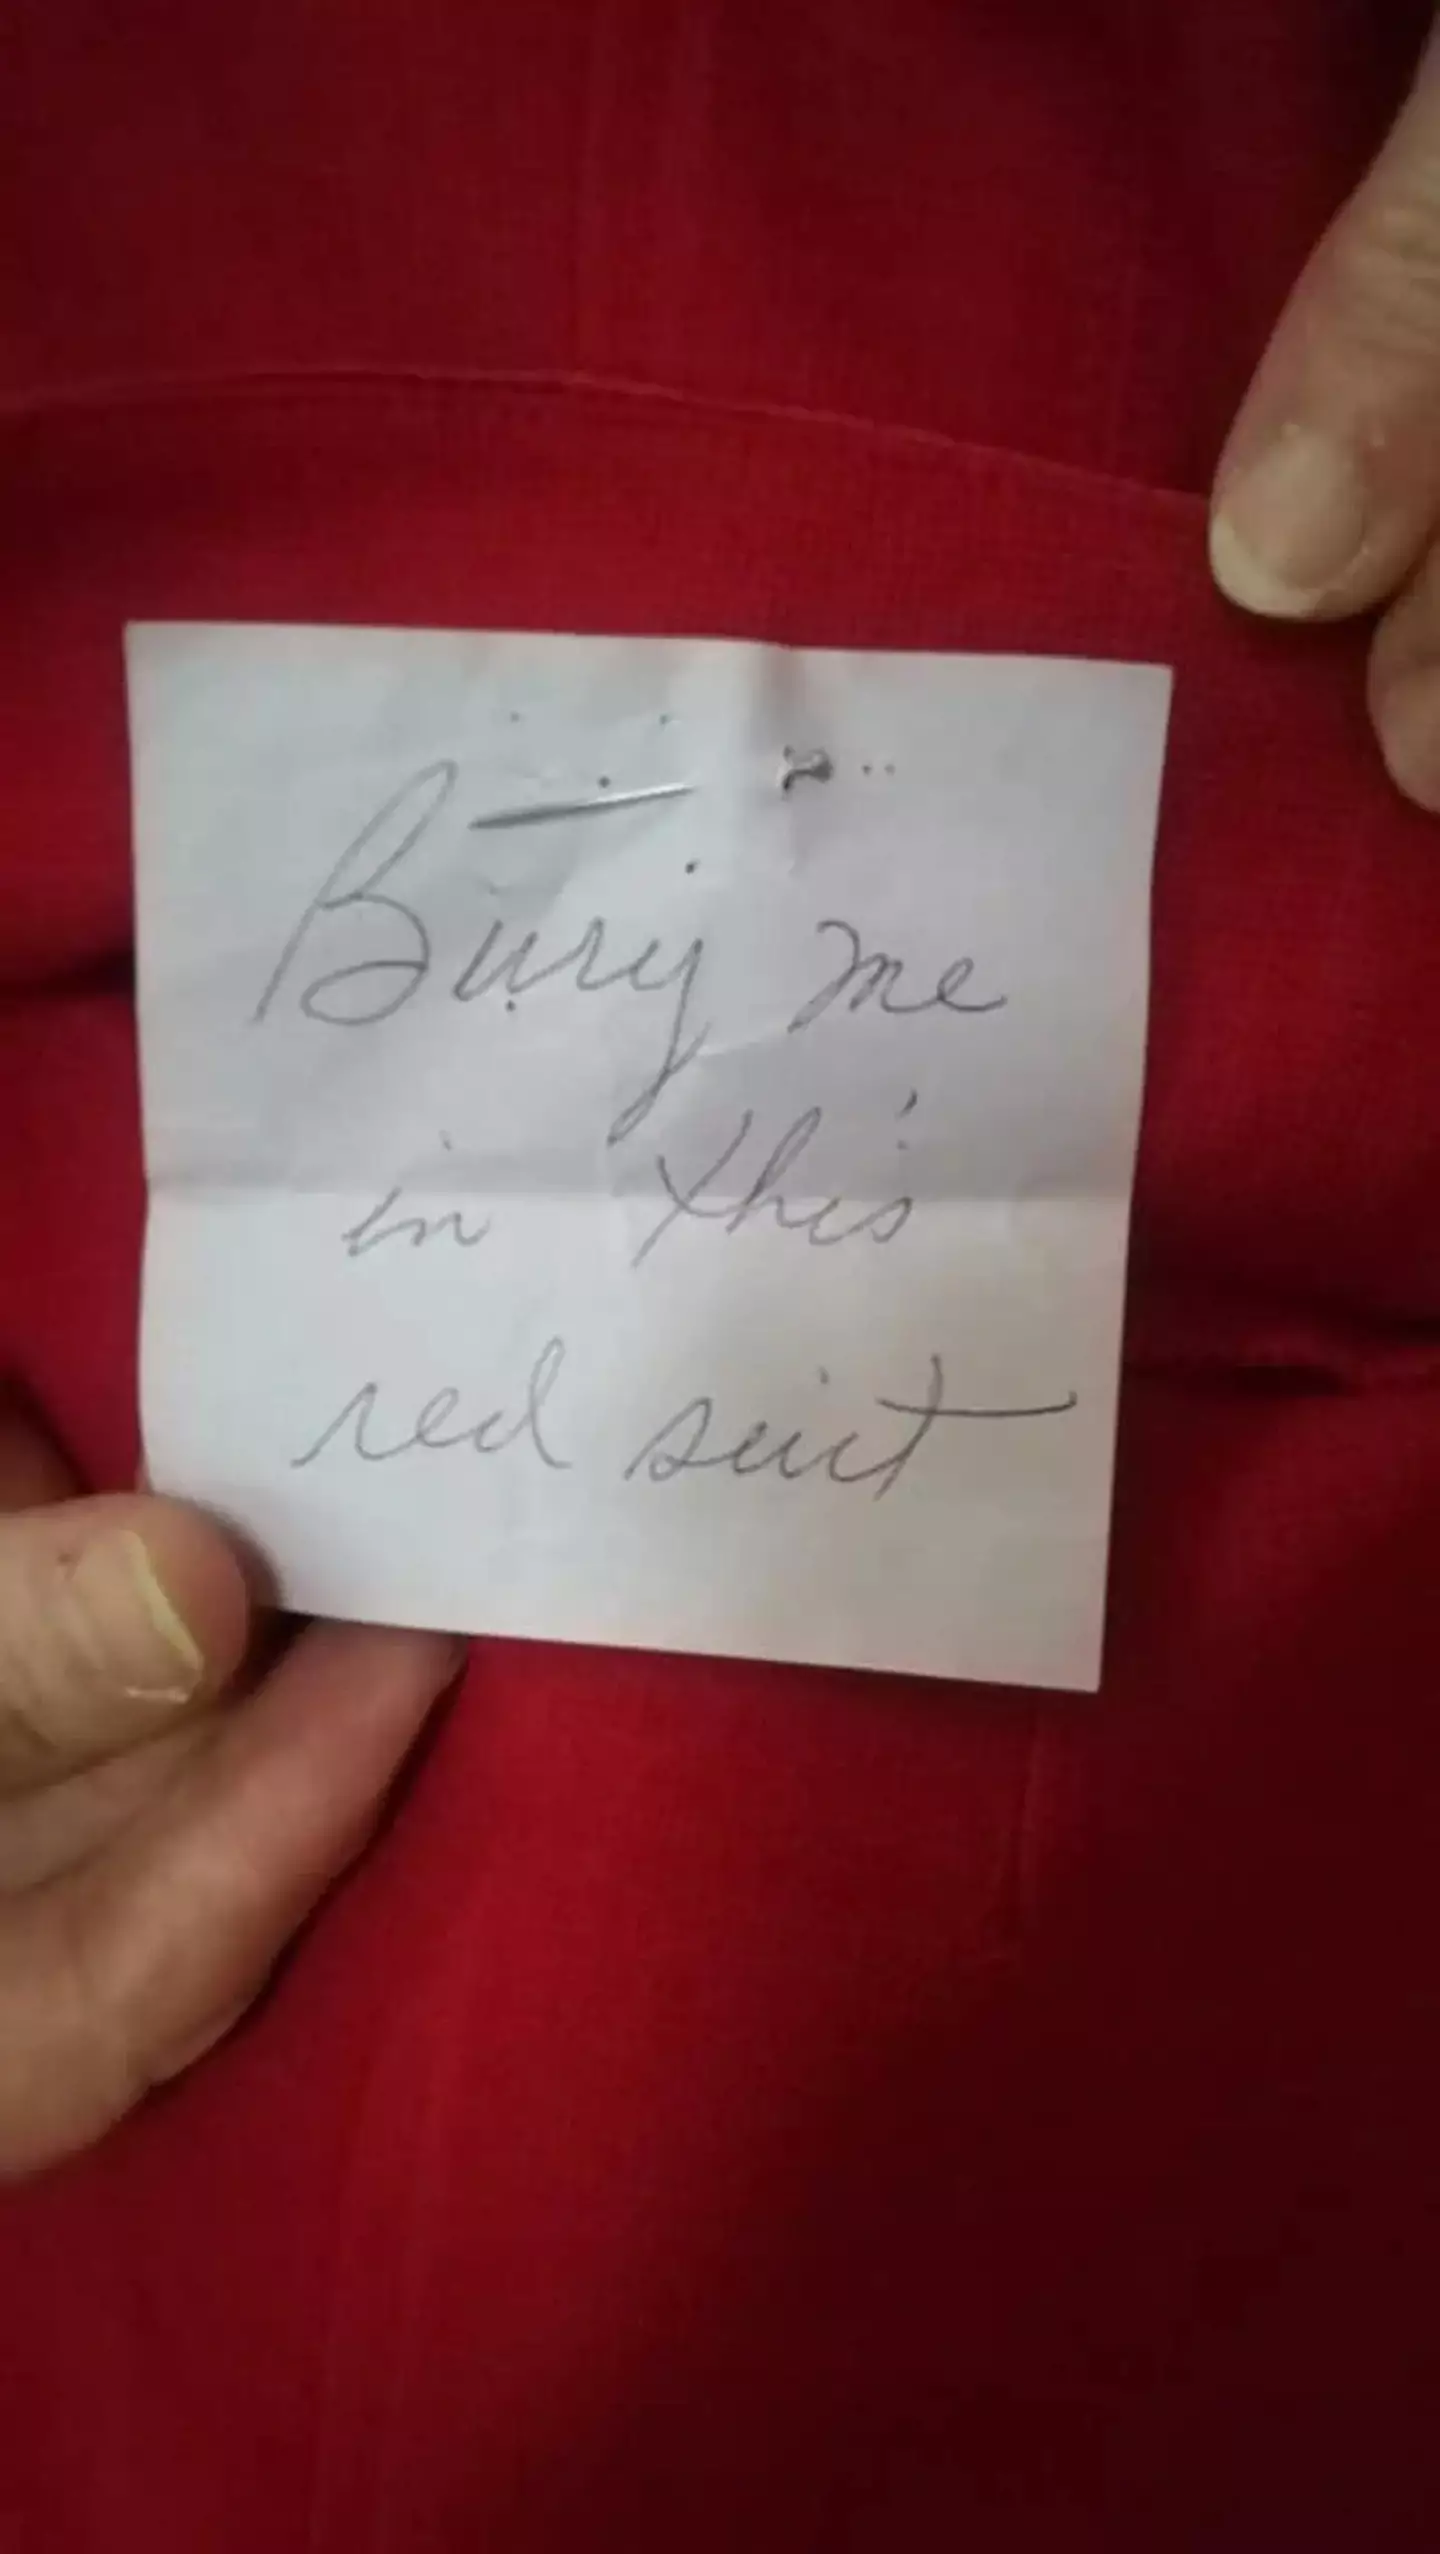 Many were left shocked by the note.